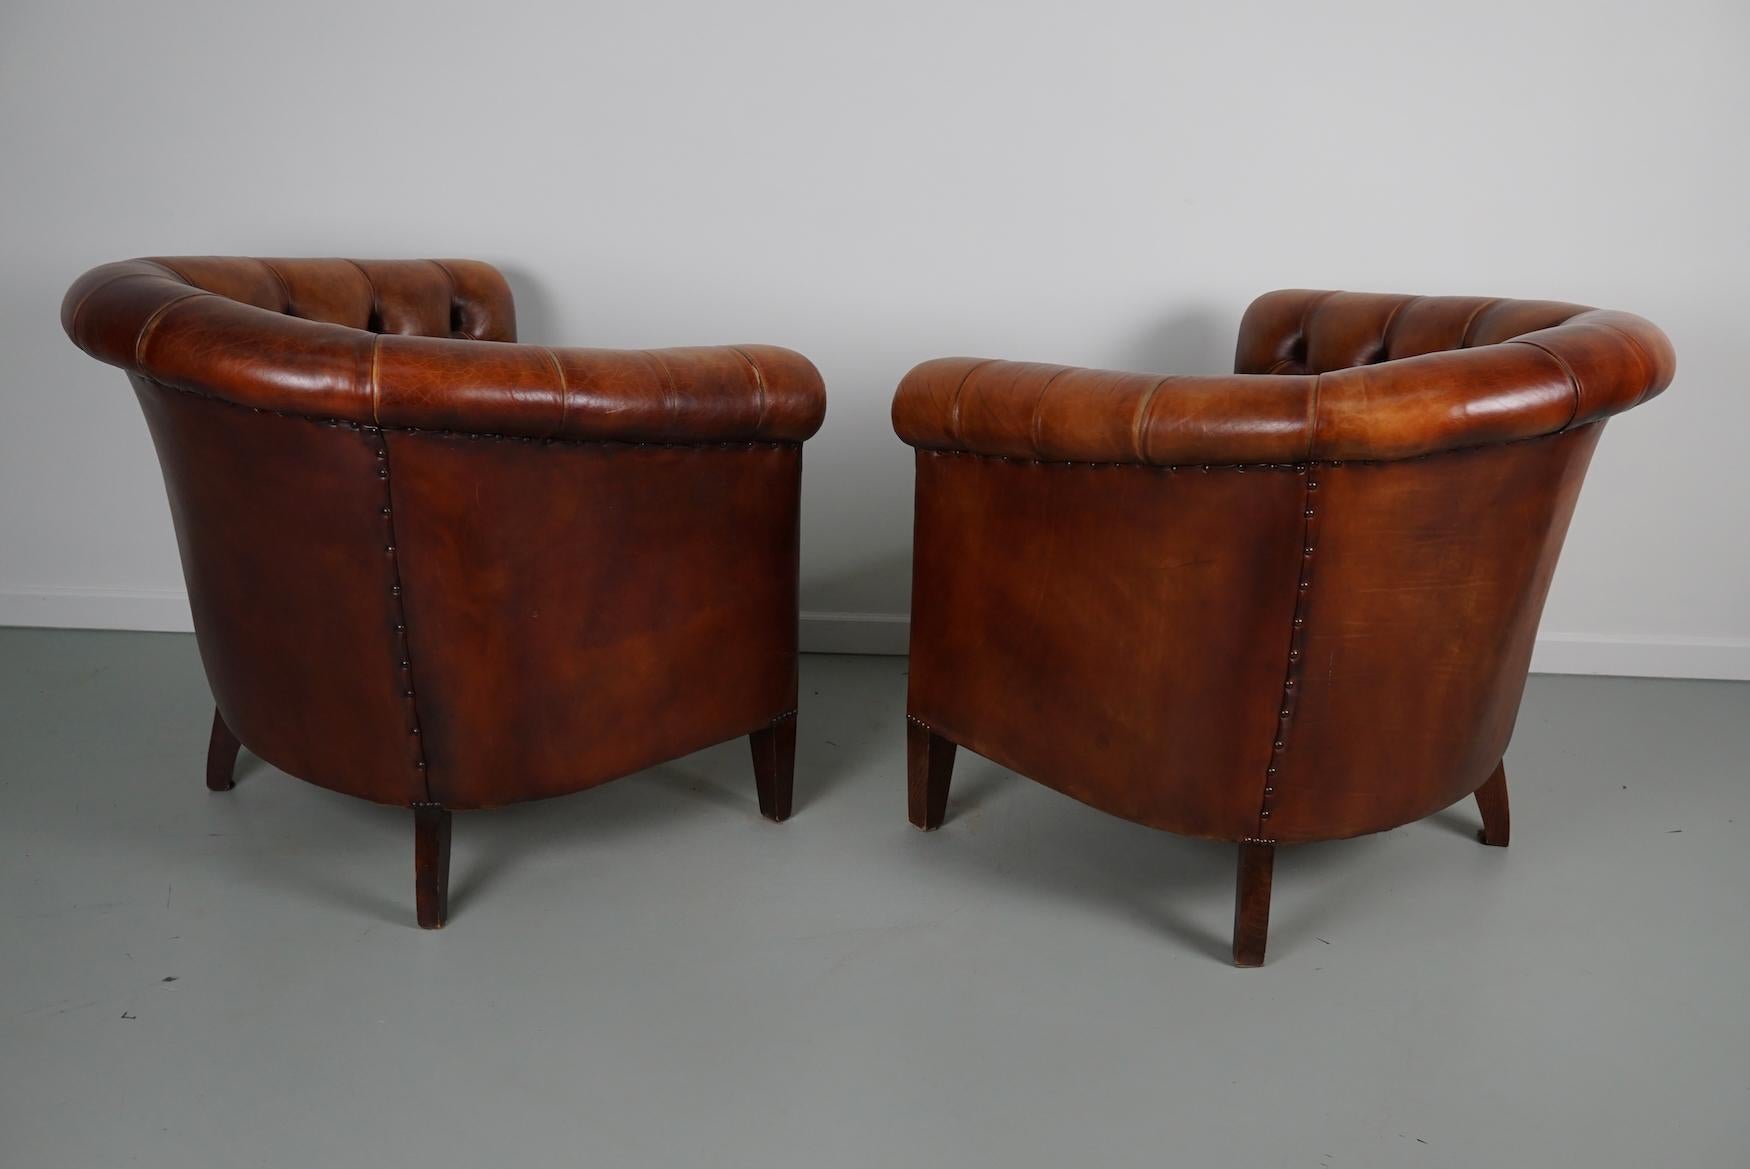 Vintage Dutch Chesterfield Cognac Leather Club Chairs, Set of 2 13